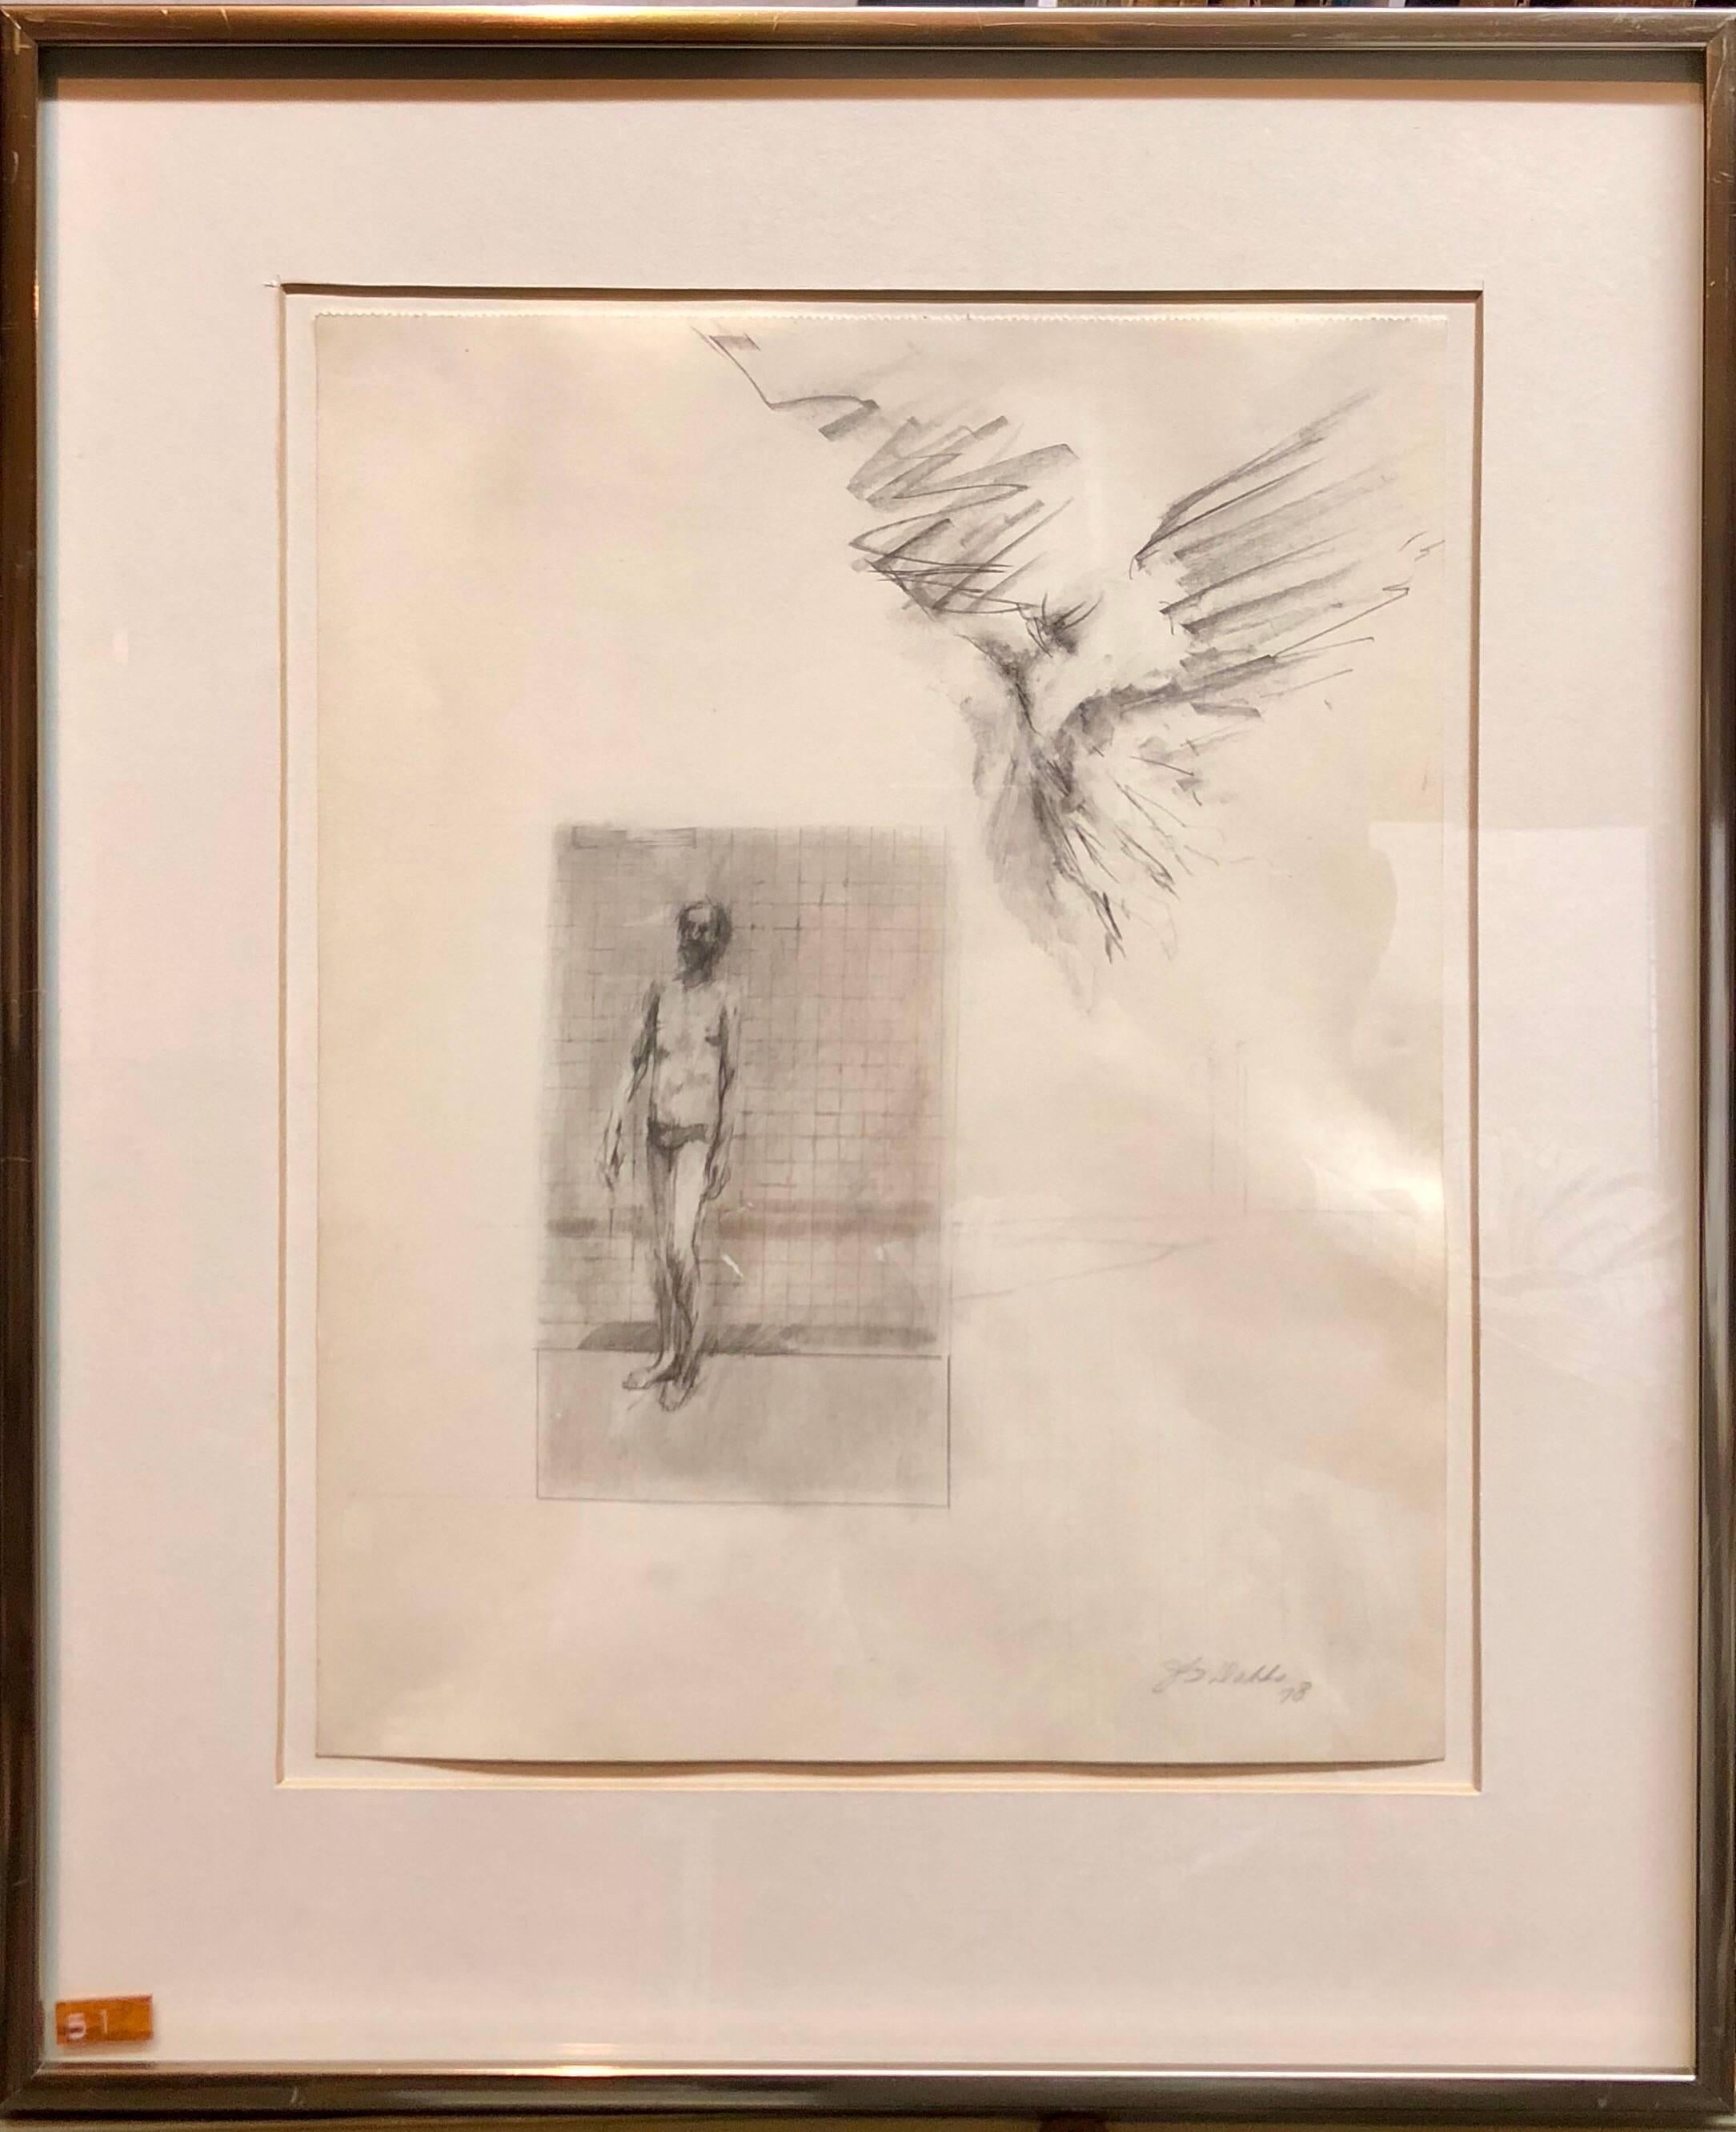 Abstract Modernist Drawing of a Nude Man with Winged Figure, Angel